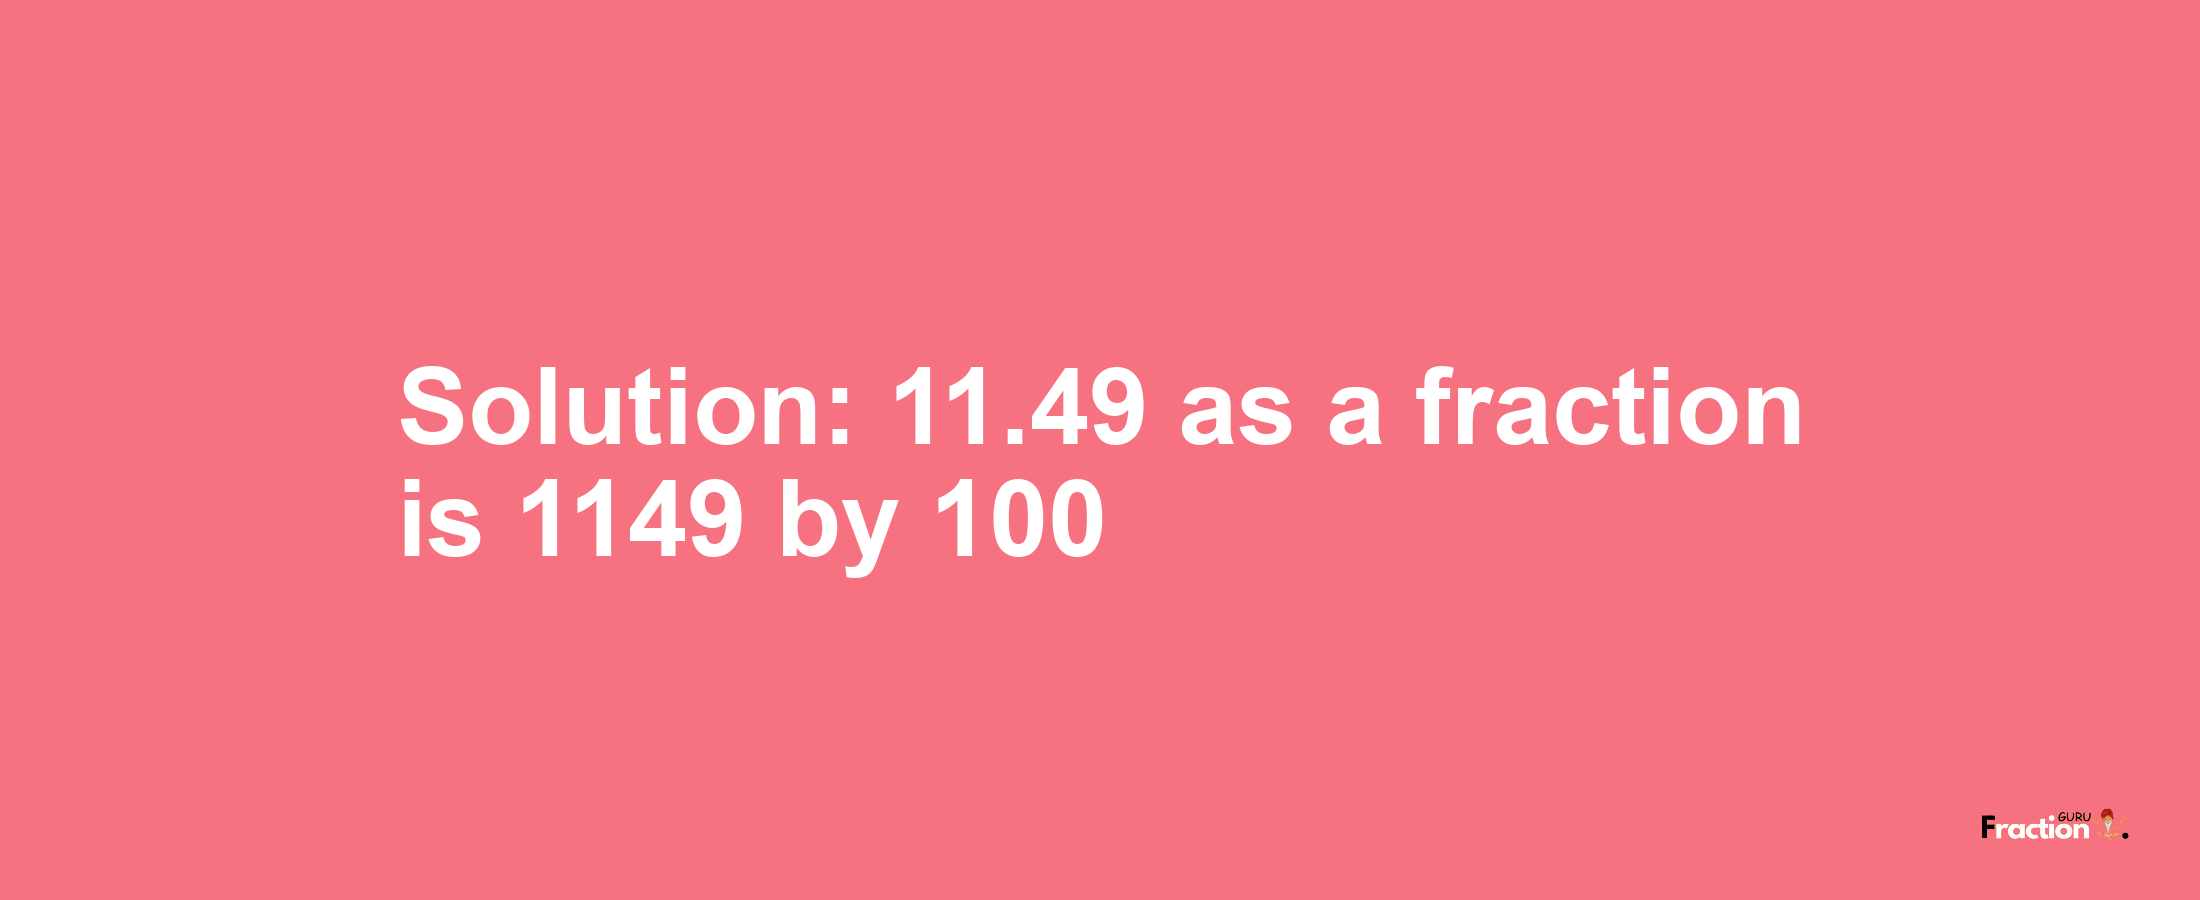 Solution:11.49 as a fraction is 1149/100